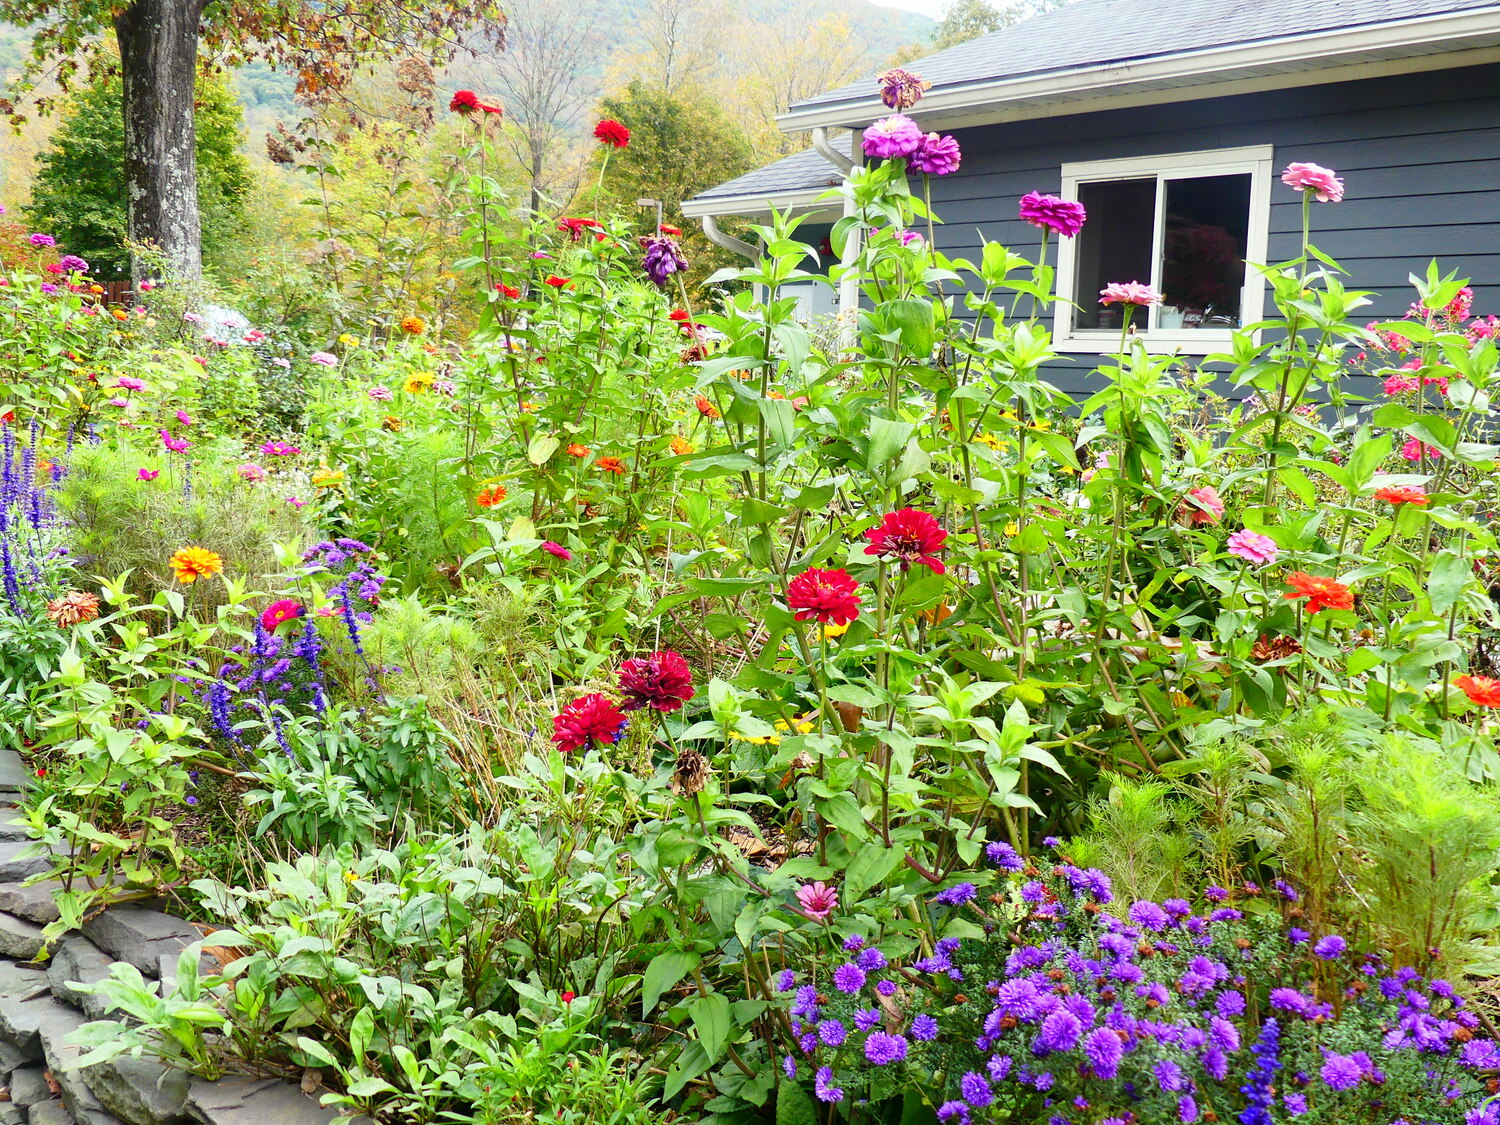 A flower garden outside a restaurant greets visitors but also supplies fall cut flowers for table arrangements.  Note the zinnias of various heights and colors as well as the blue salvia.  ANDREW MESSINGER